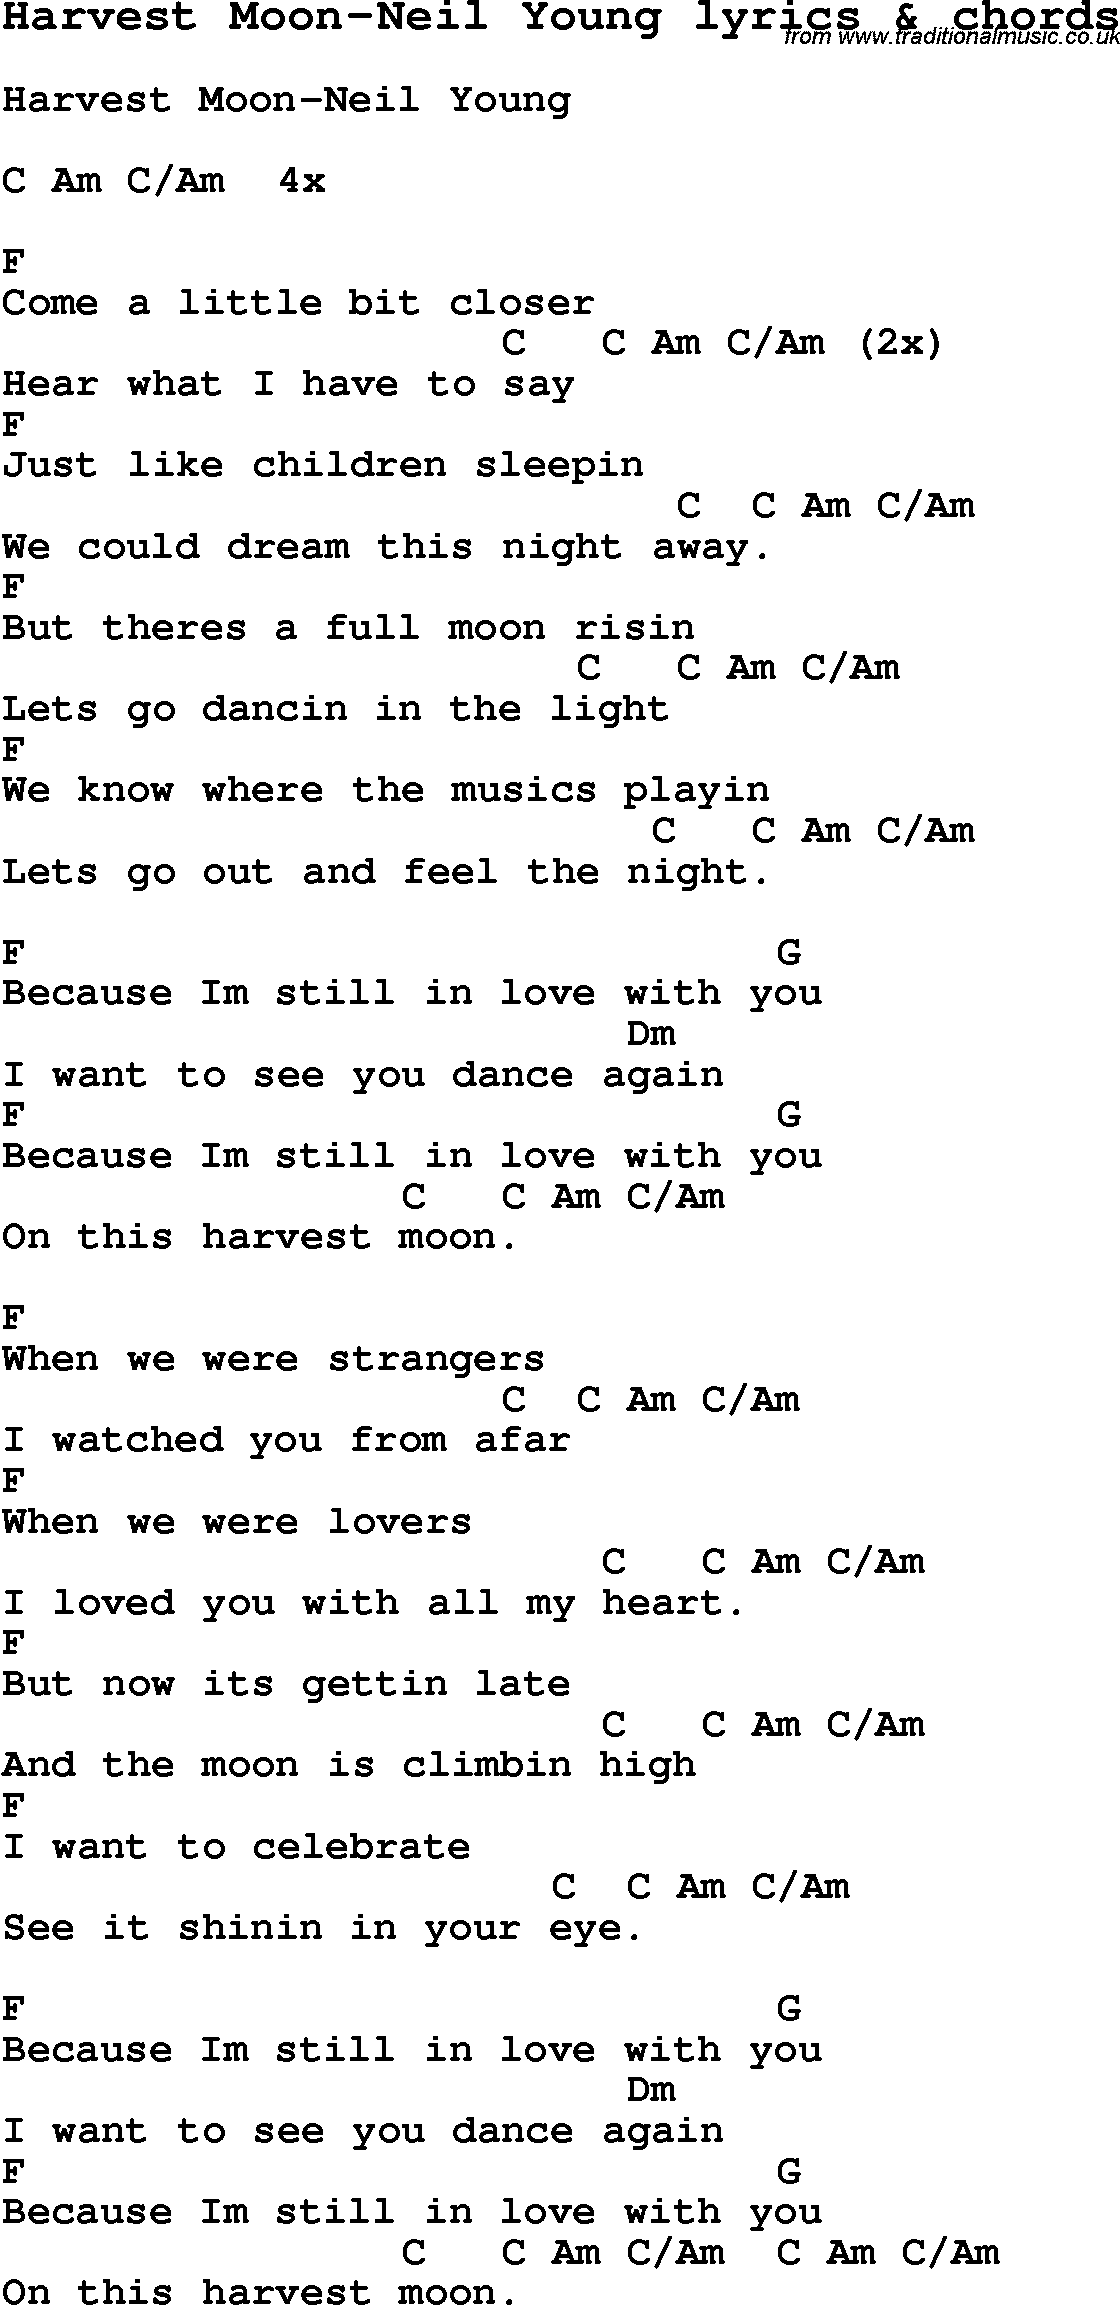 Love Song Lyrics for: Harvest Moon-Neil Young with chords for Ukulele, Guitar Banjo etc.